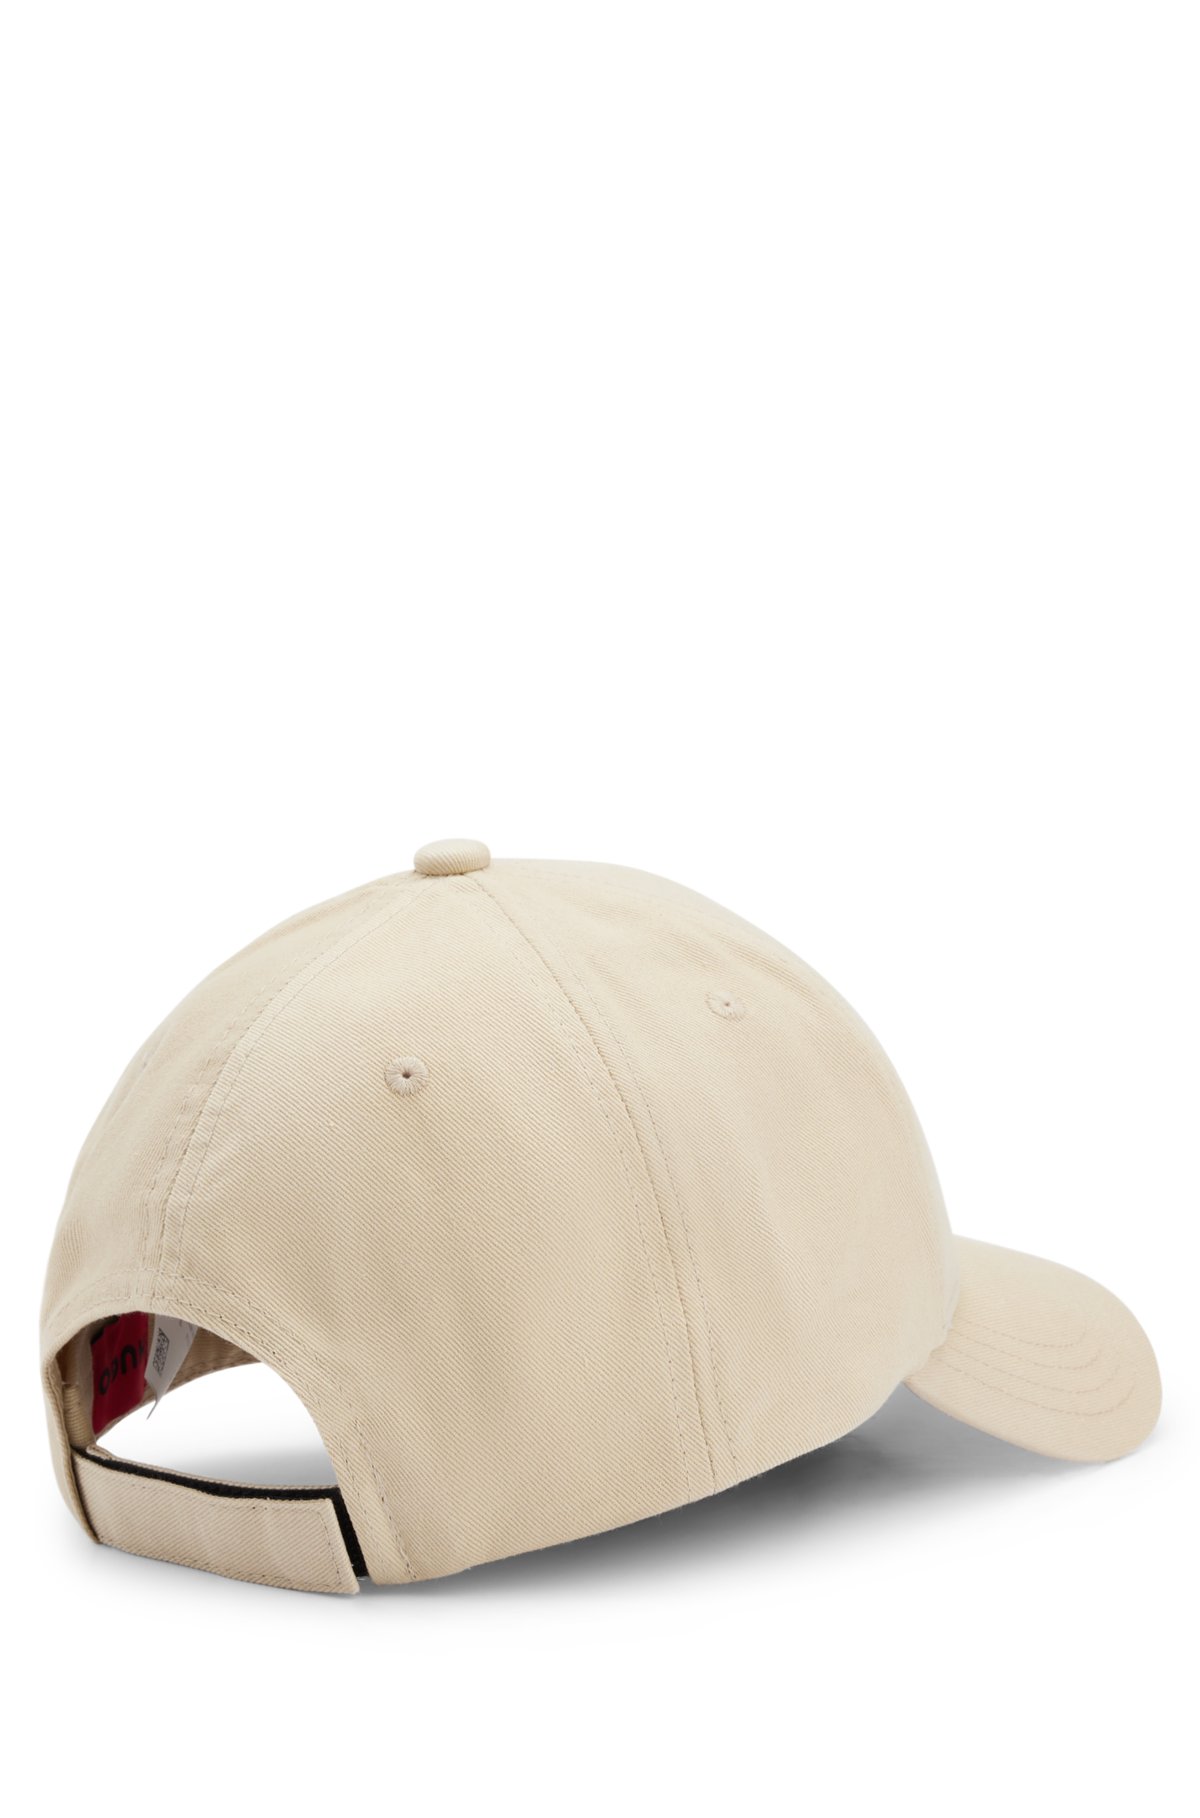 Cotton-twill cap with logo patch, Light Beige